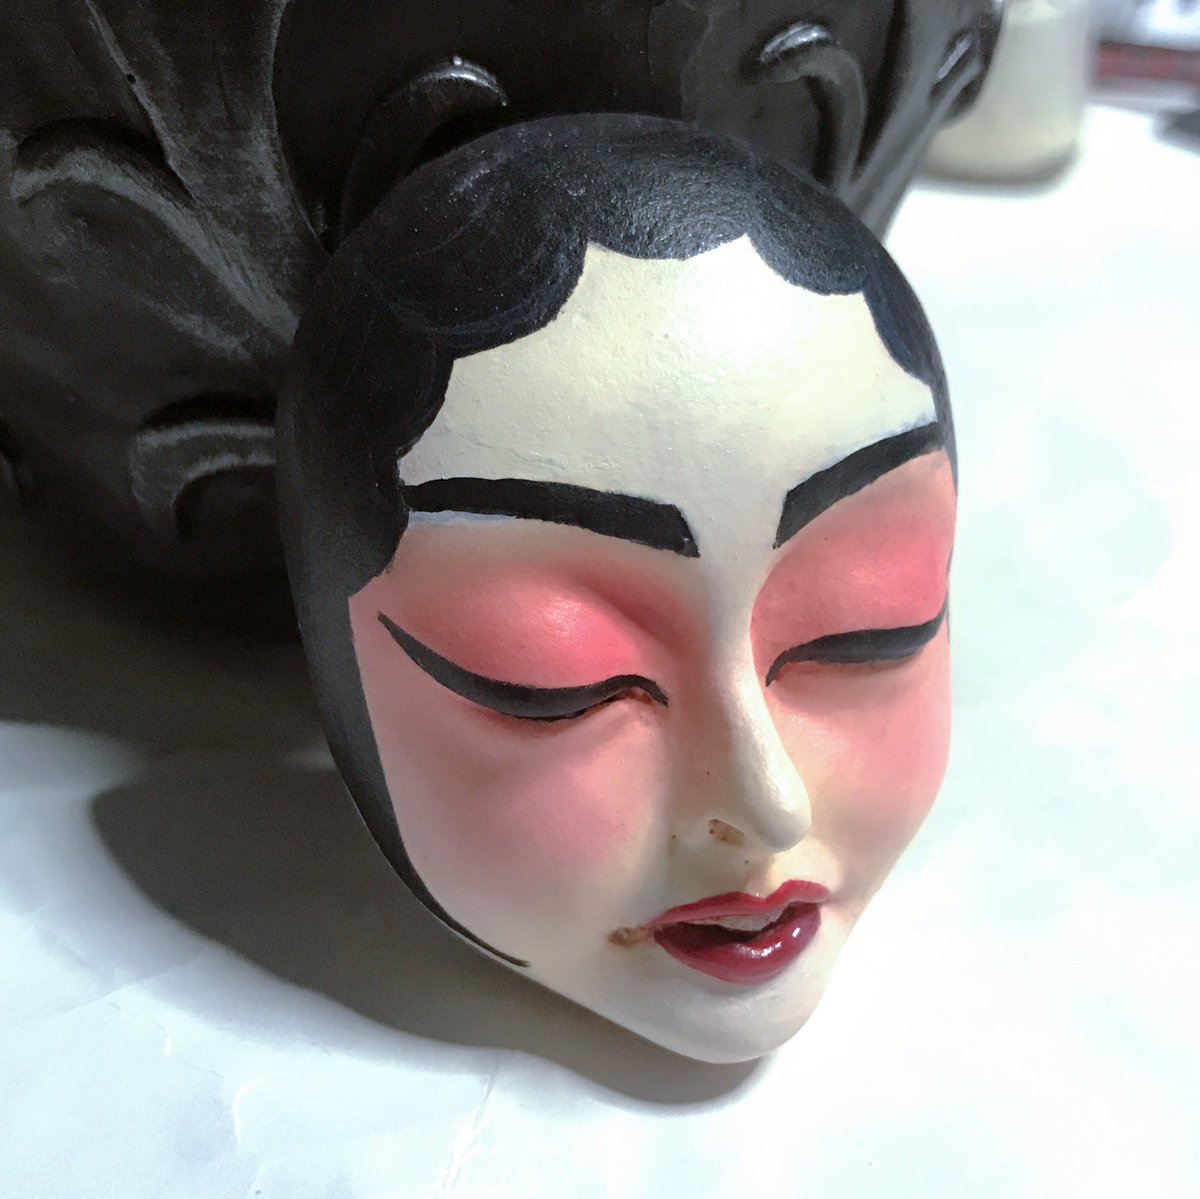 First new Dollface painted! This one’s called ‘Peking’ and based on Beijing Opera makeup. Hoping to have all three designs done by this week so I can have them up on my Etsy store sooon! Keltonfx.etsy.com #dollfaces #keltonfx #dollfacesbykeltonfx